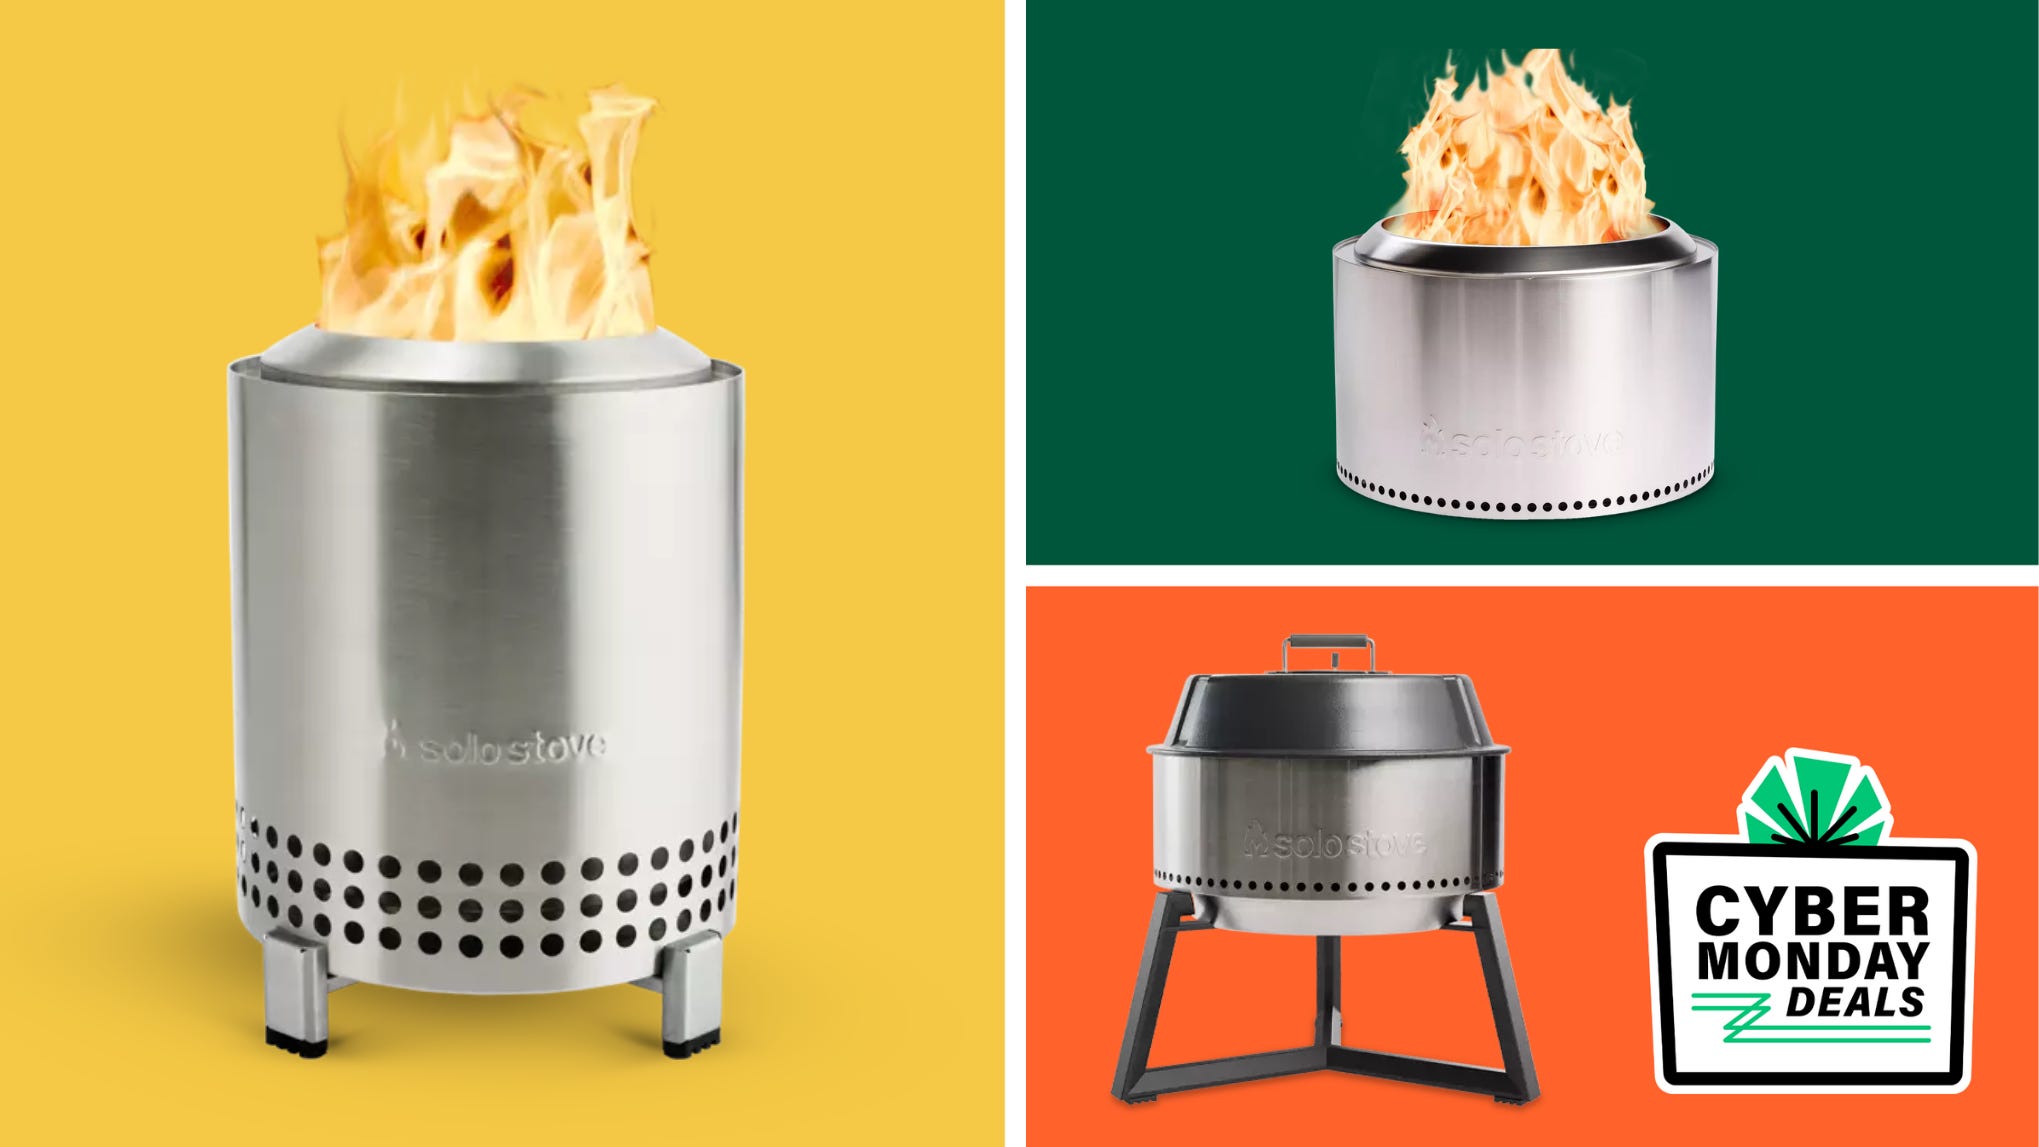 Solo Stove Cyber Monday deals Get up to 40 off Solo Stove fire pits